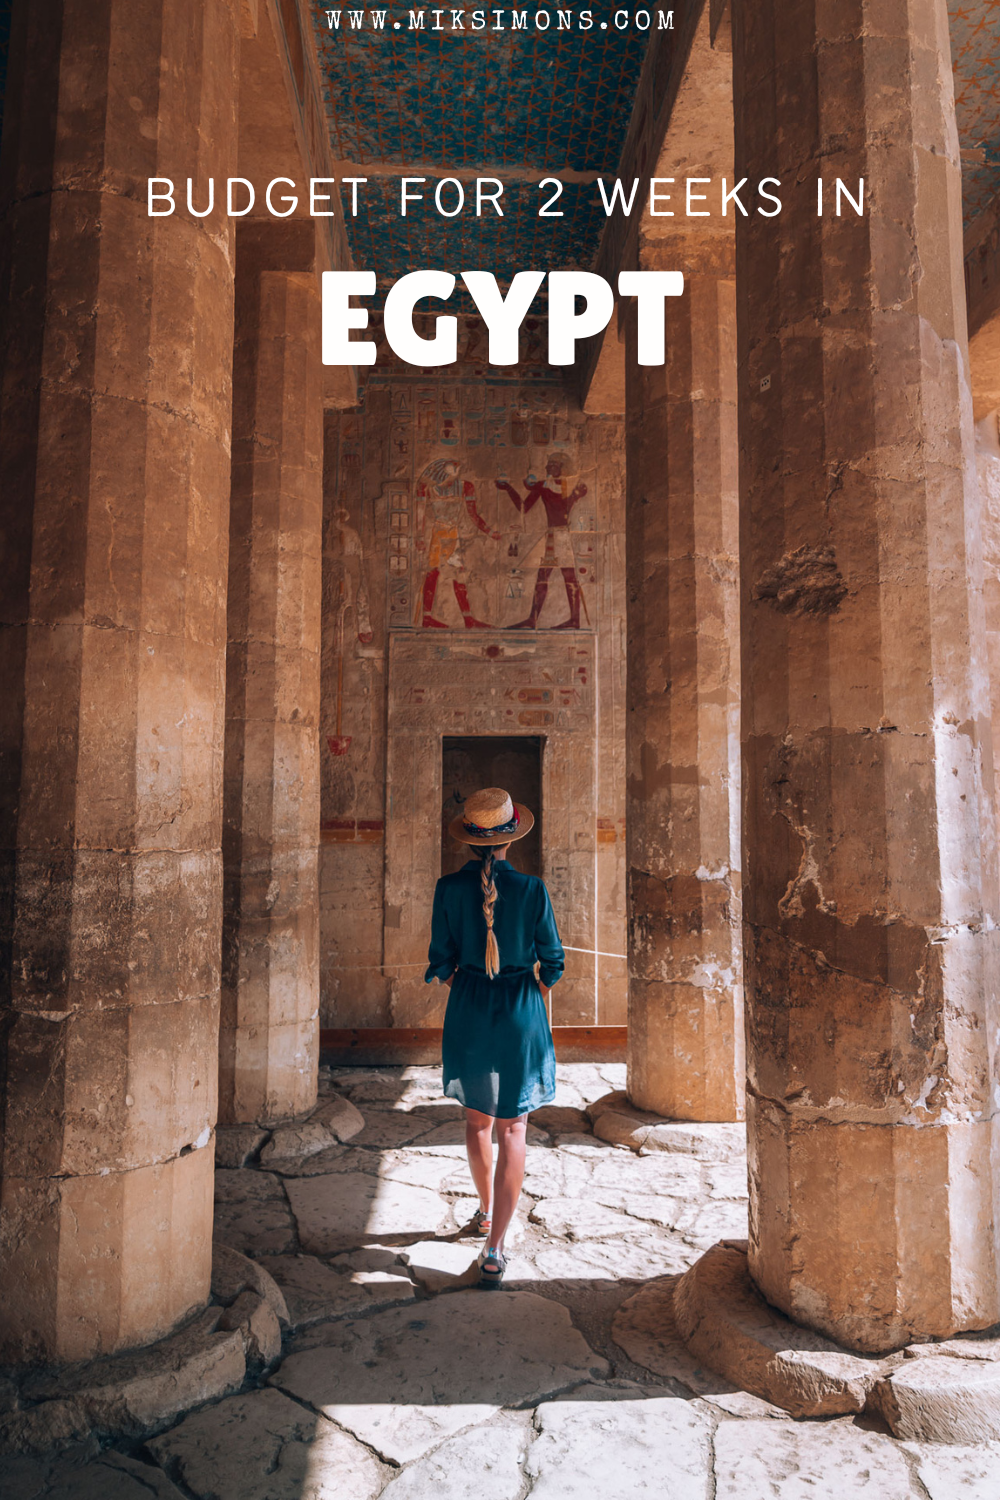 How much does a trip to egypt cost? Budget for 2 weeks in Egypt